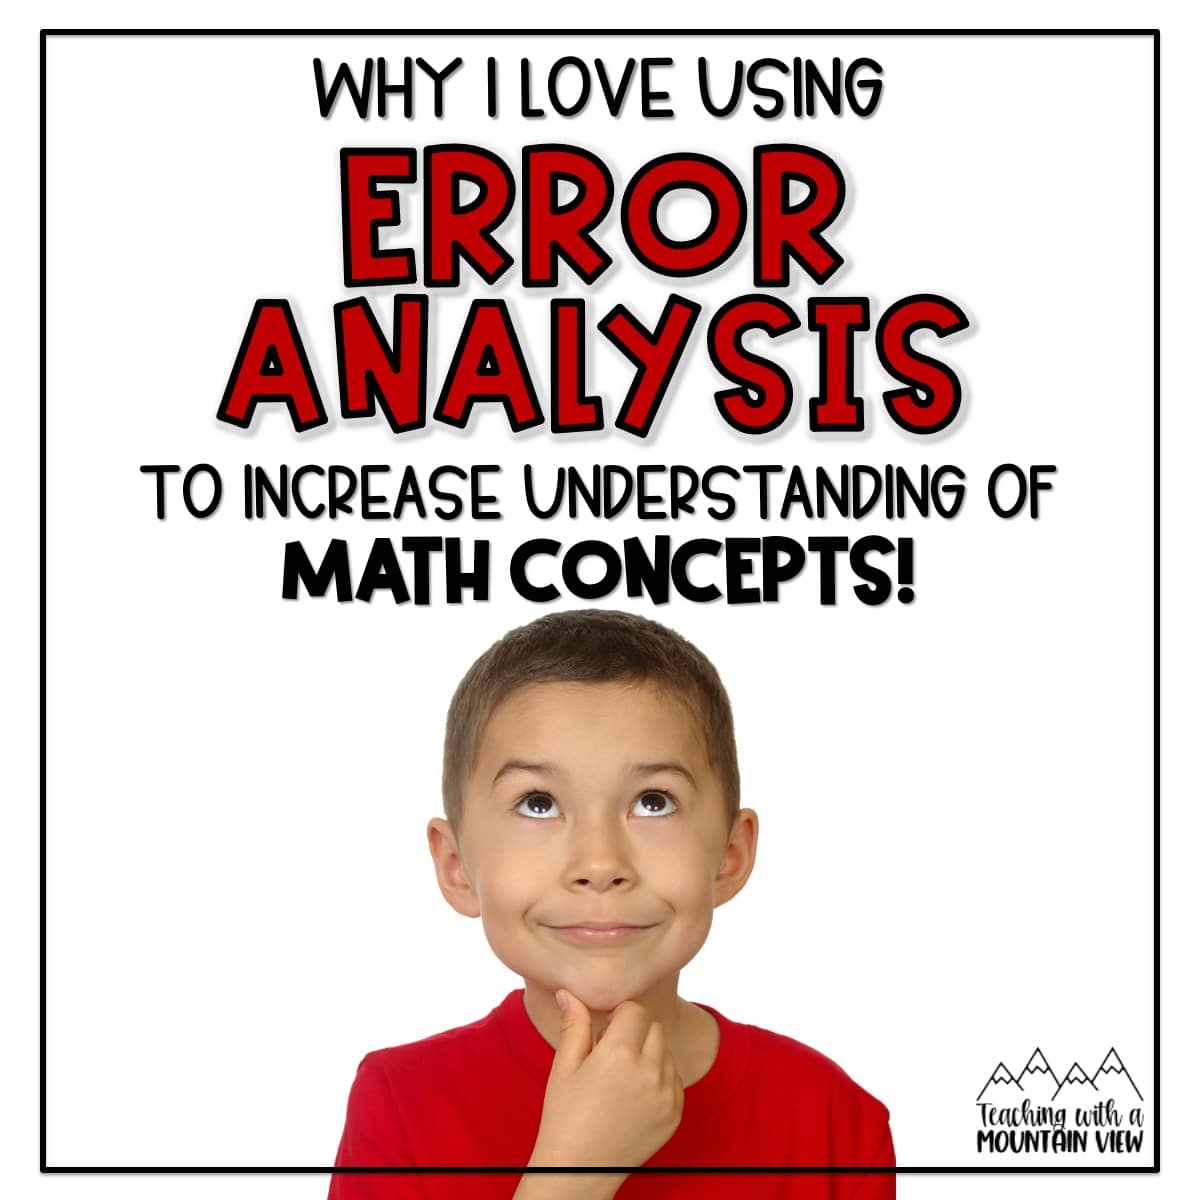 Tips for getting started with error analysis in upper elementary, a great math strategy that deepens math understanding.